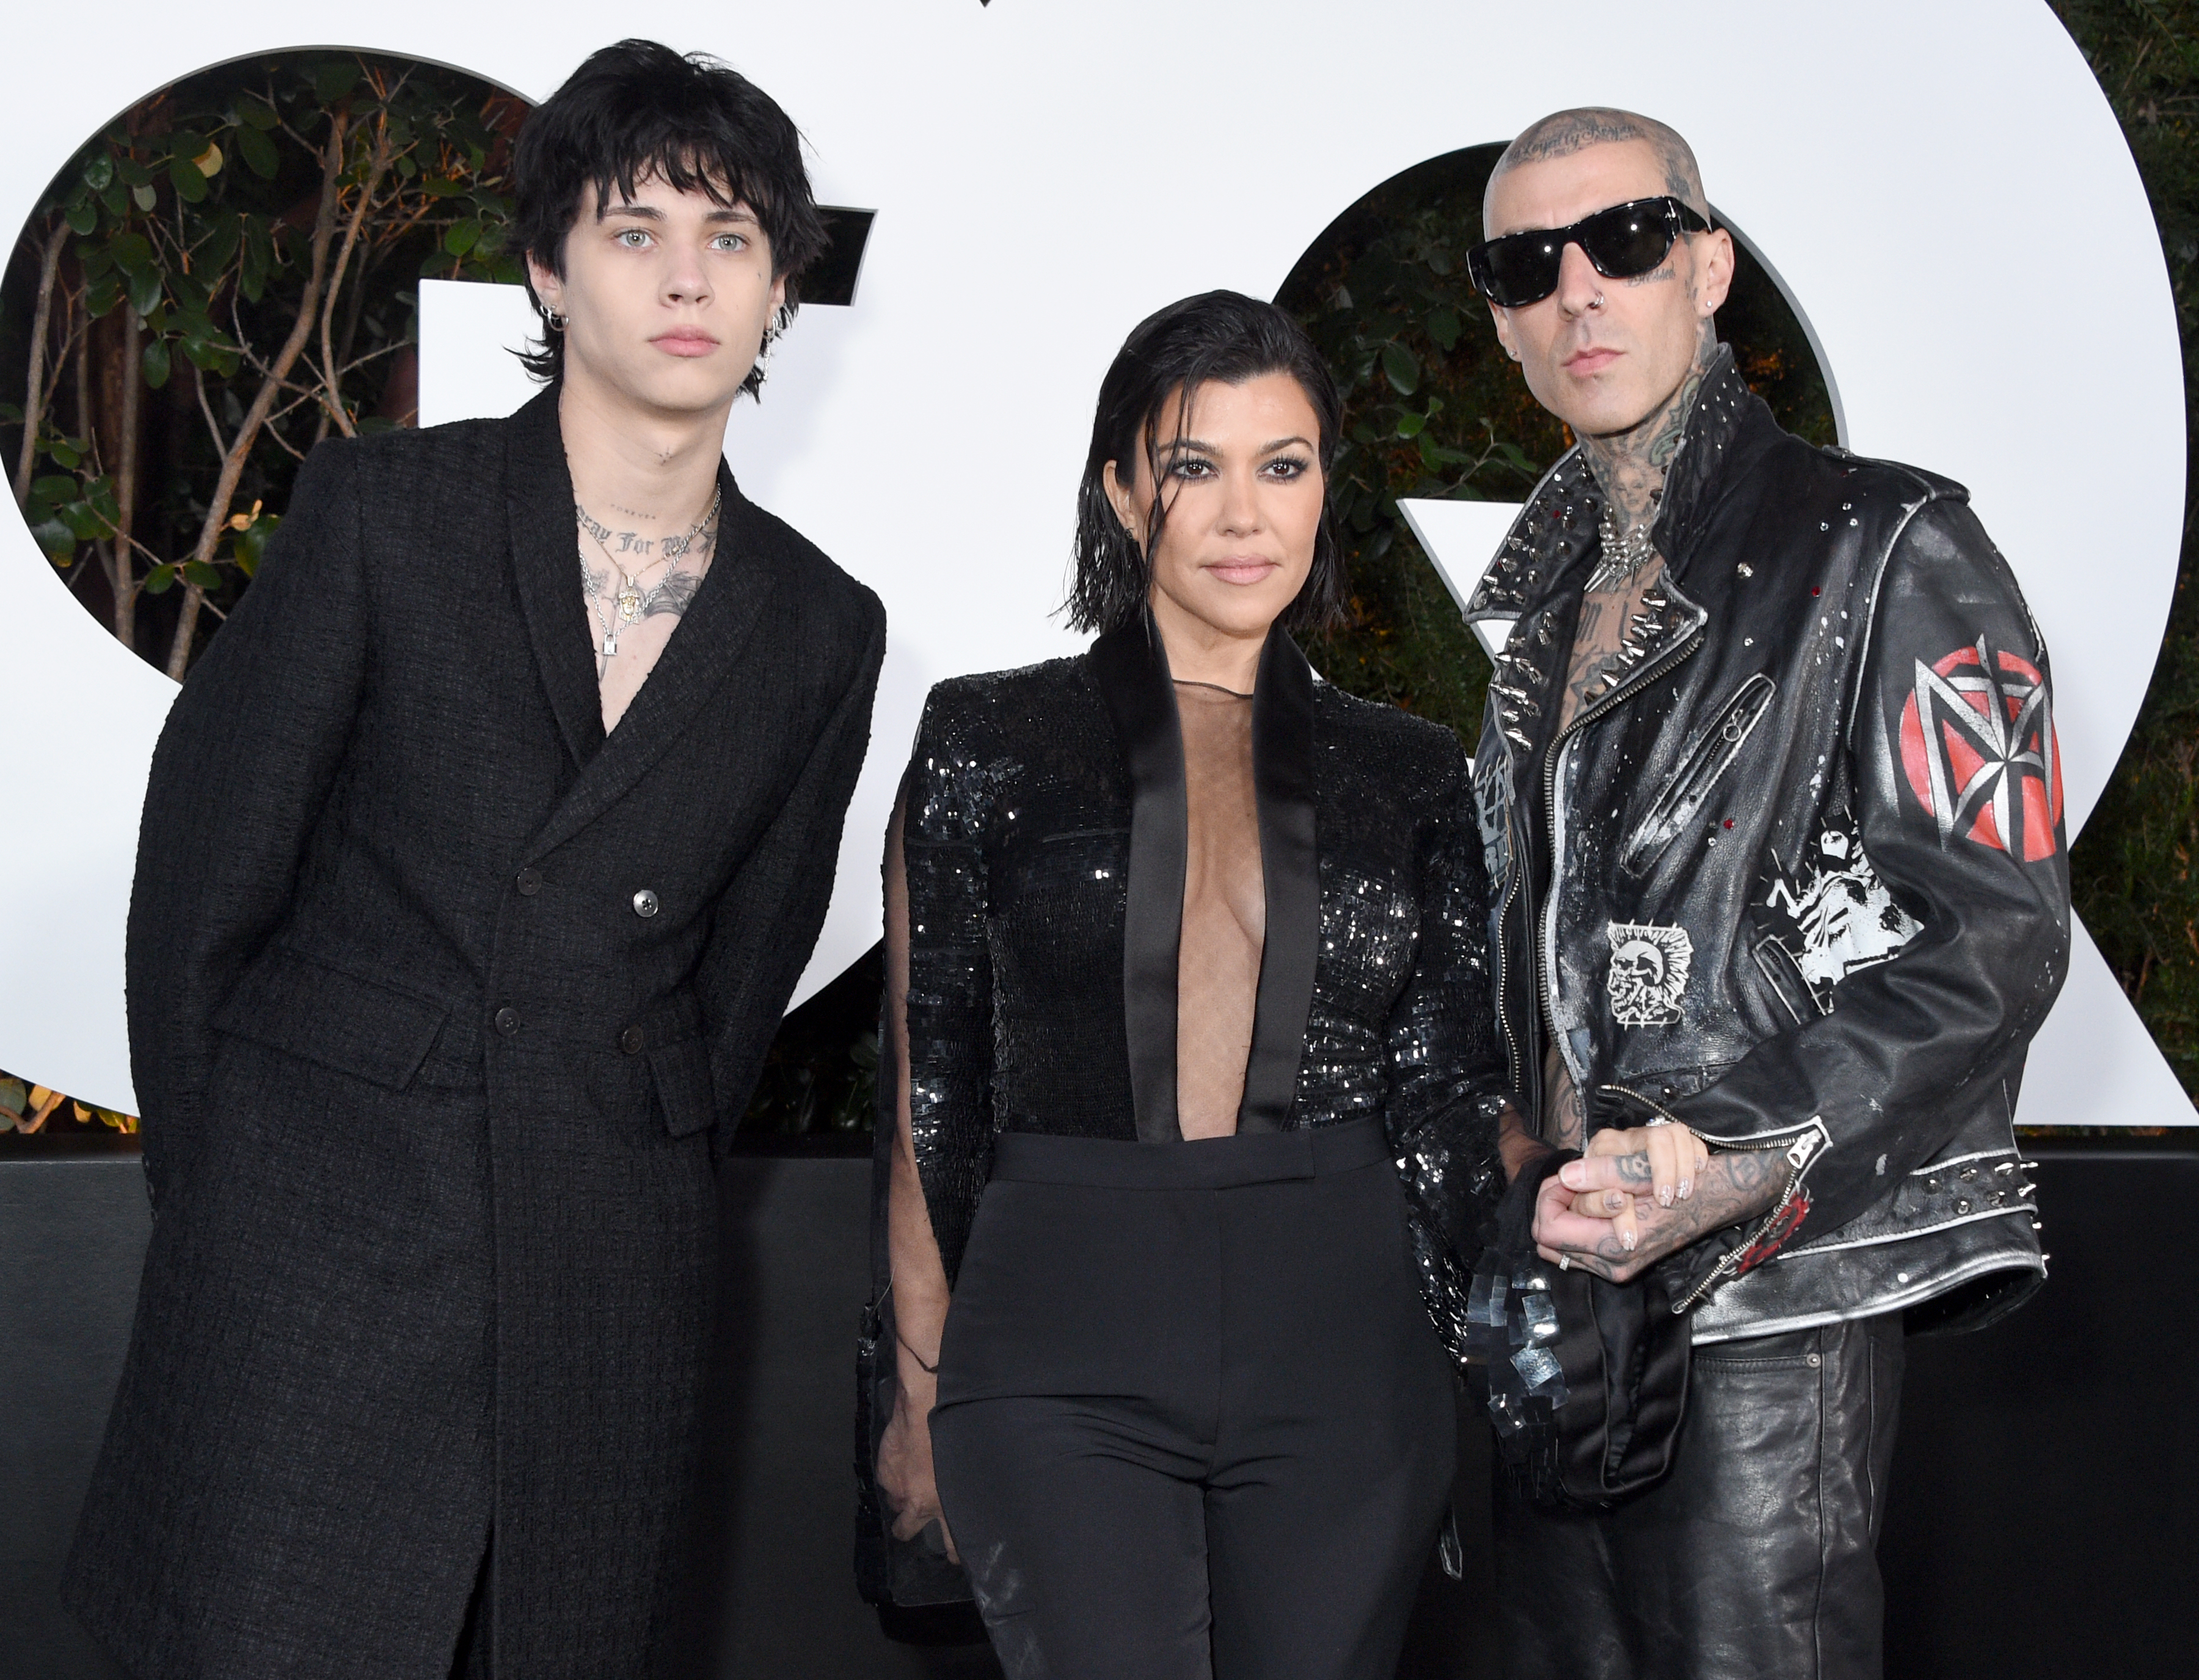 From left to right: Landon, Kourtney, and Travis on the red carpet